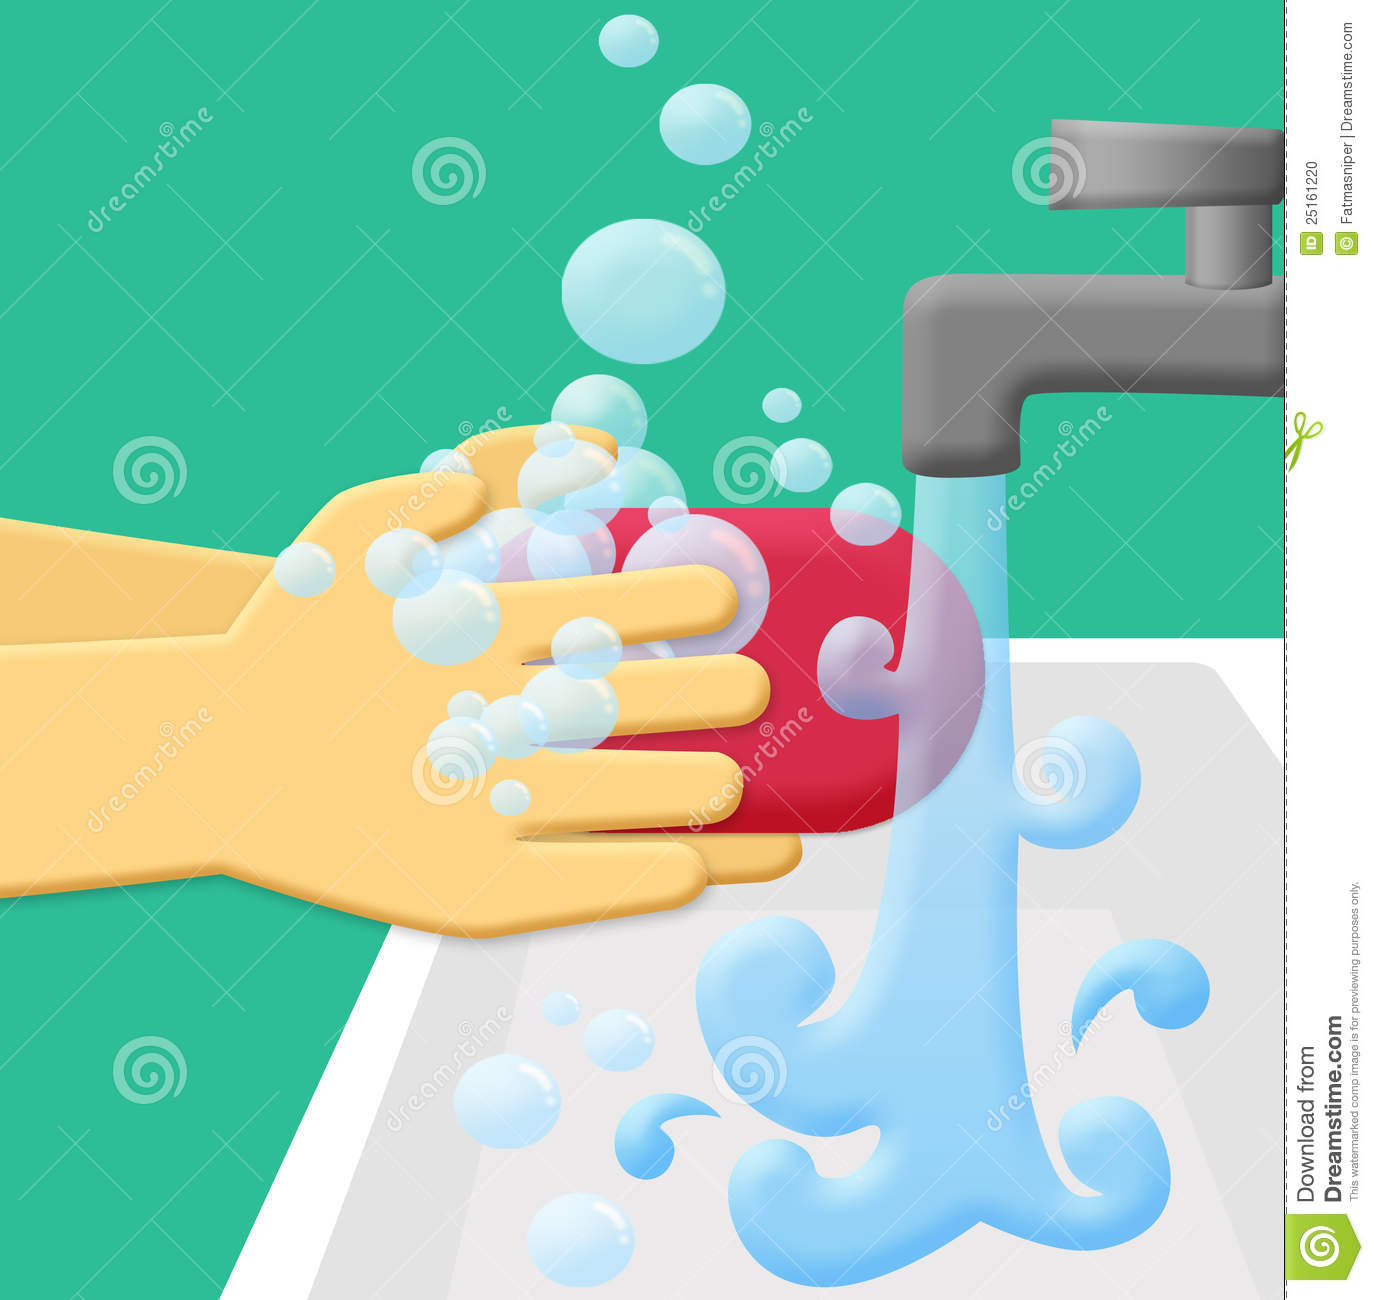 Wash Hands Using Soap And Rinse With Running Water